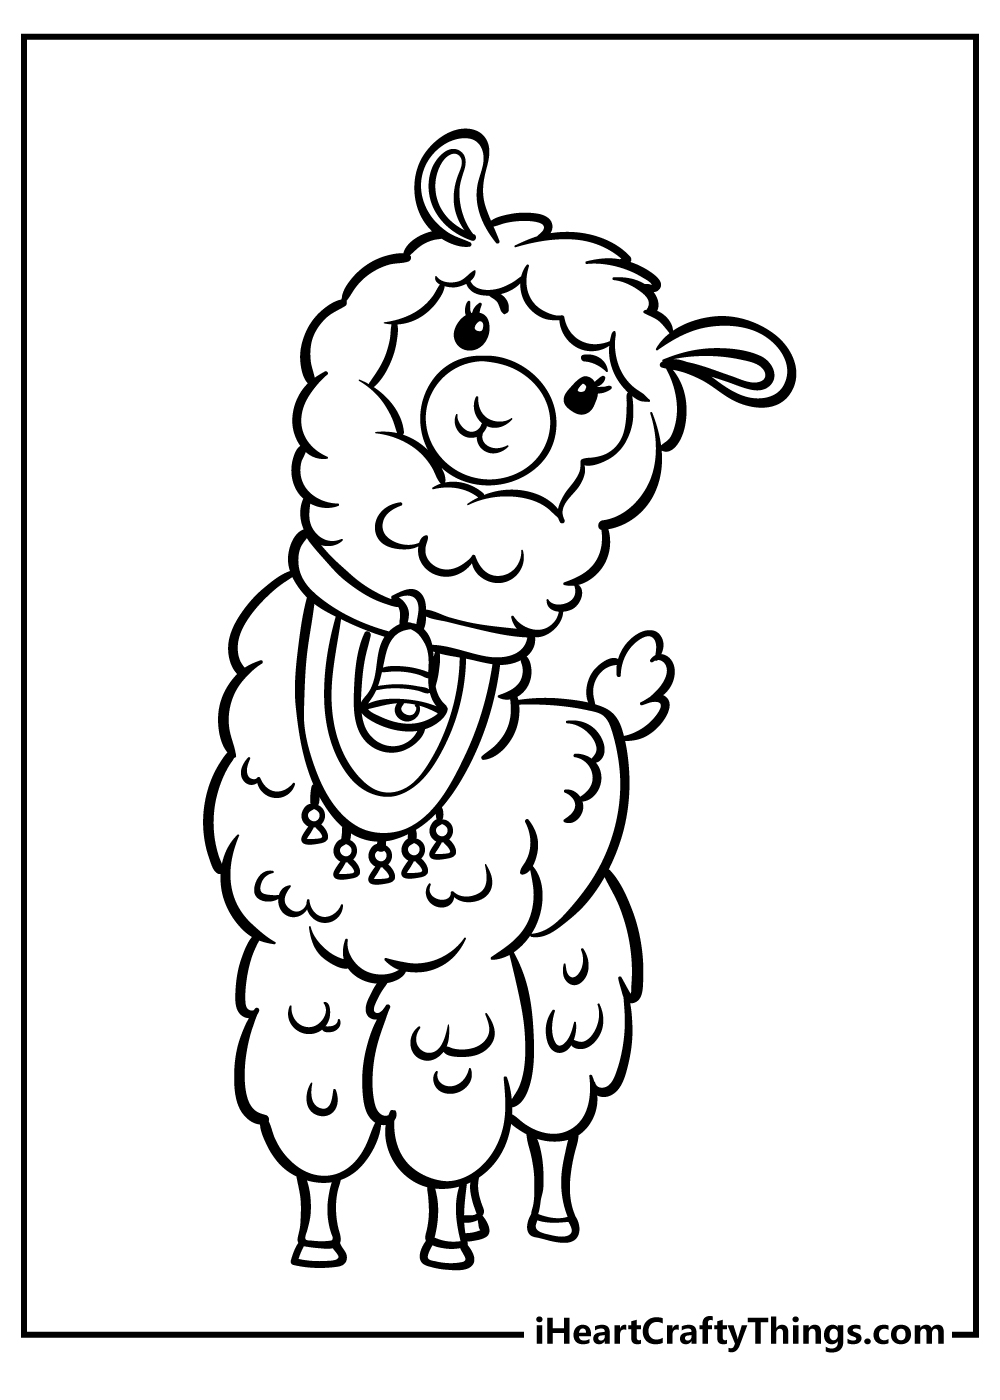 llama Easy Coloring Pages